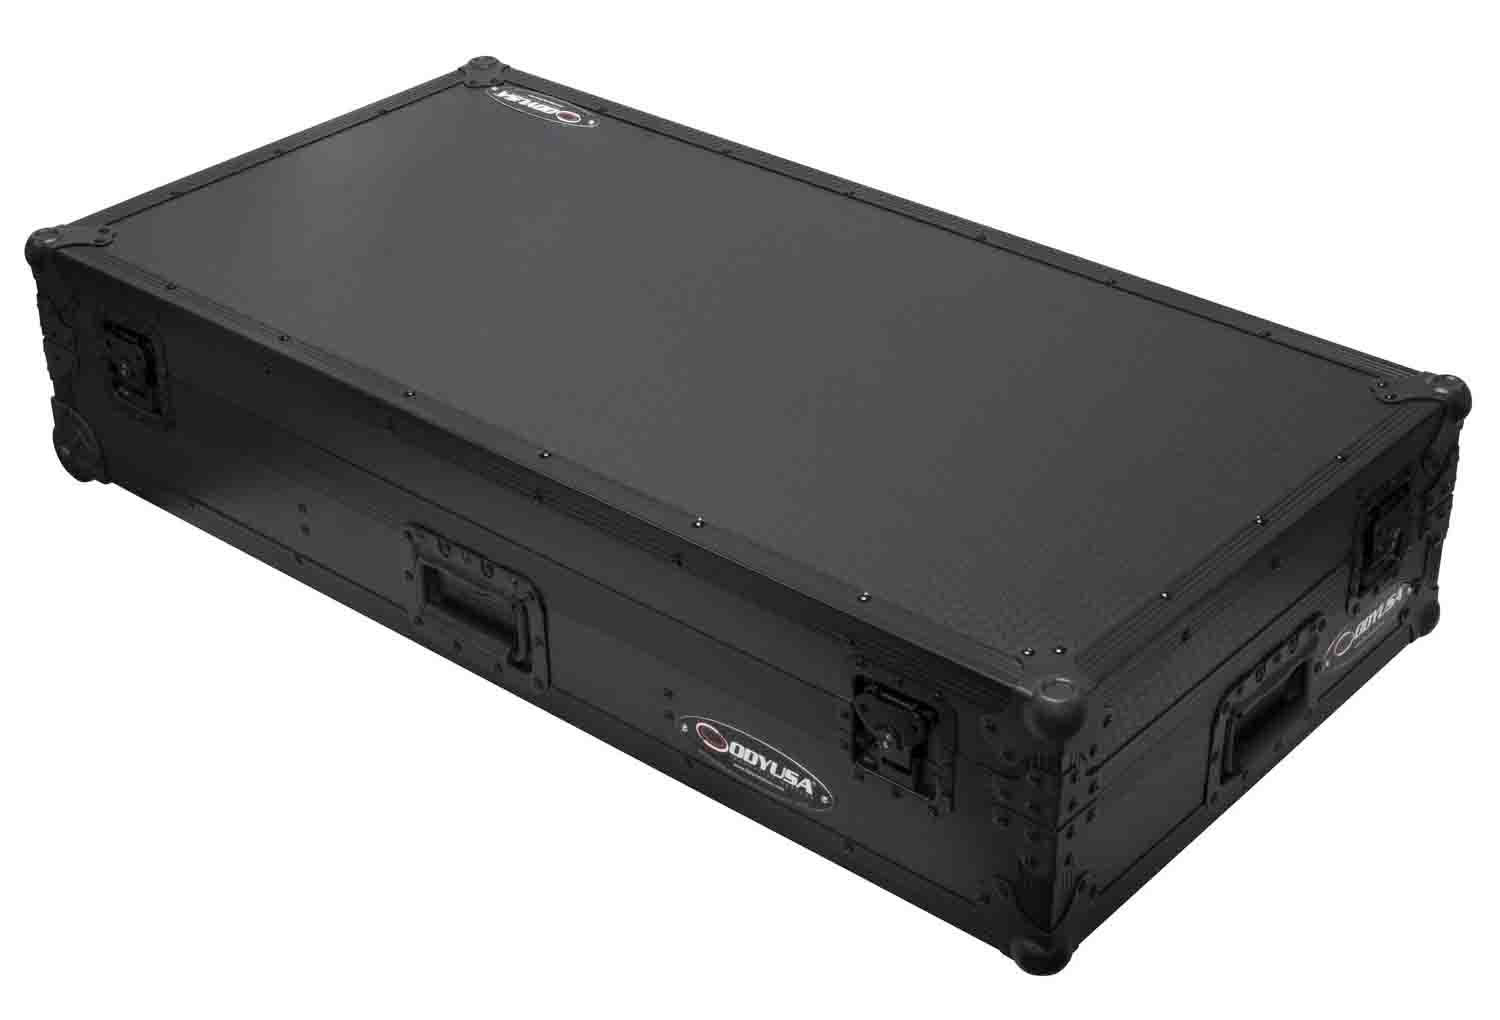 B-Stock: Odyssey 810158 Industrial Board DJ Case for 12" DJ Mixers and Two Pioneer CDJ-3000 Multi Players - Hollywood DJ